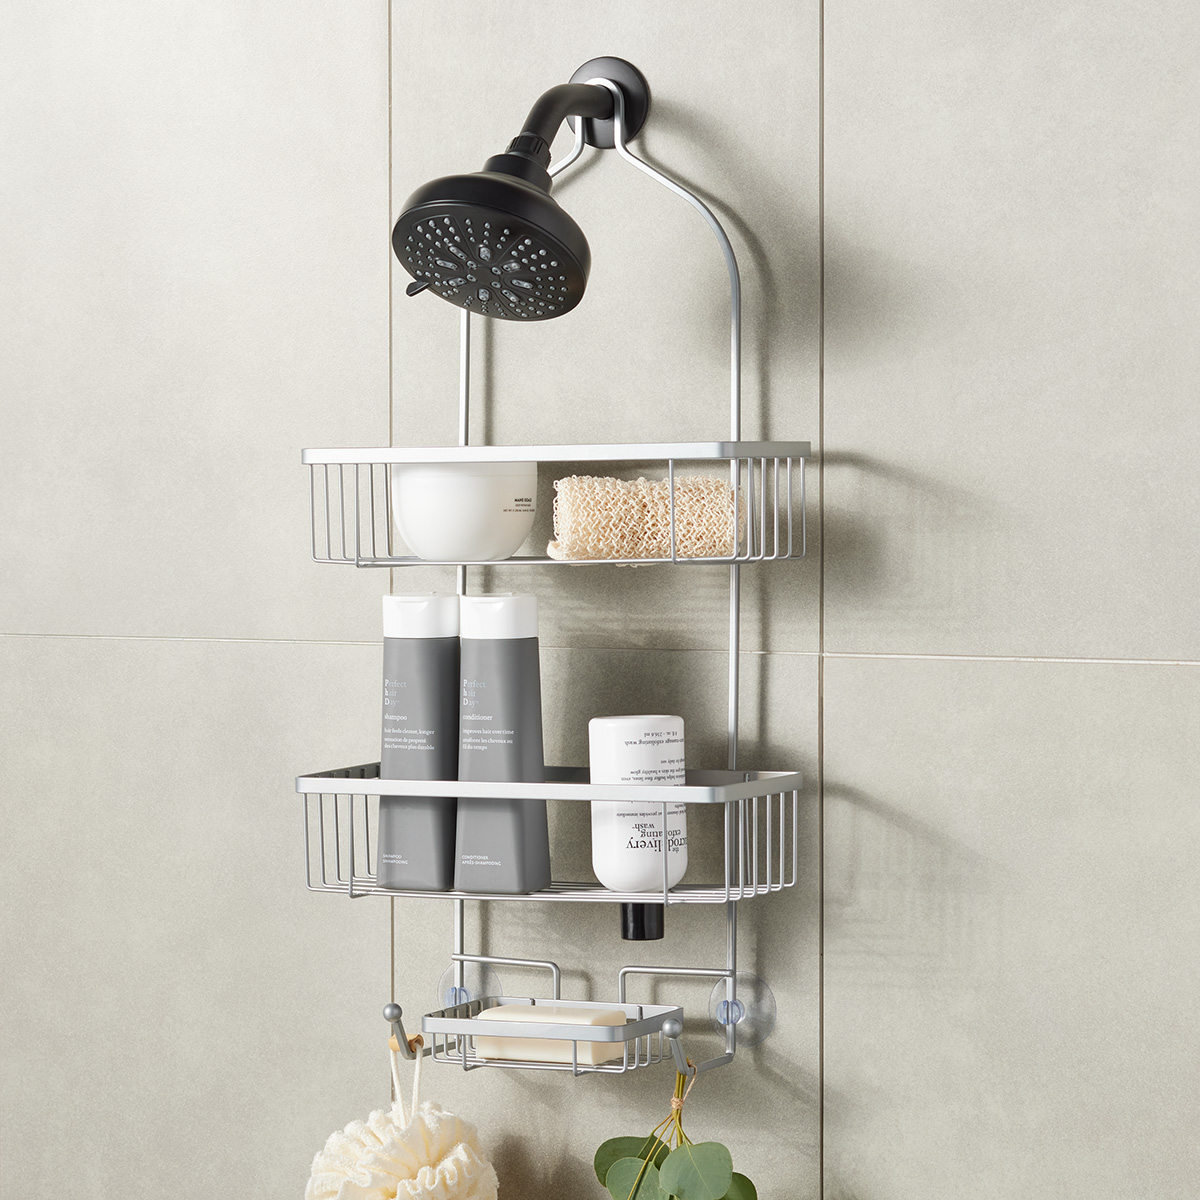 https://www.containerstore.com/catalogimages/443838/10088400_Troy_shower_caddy_silver.jpg